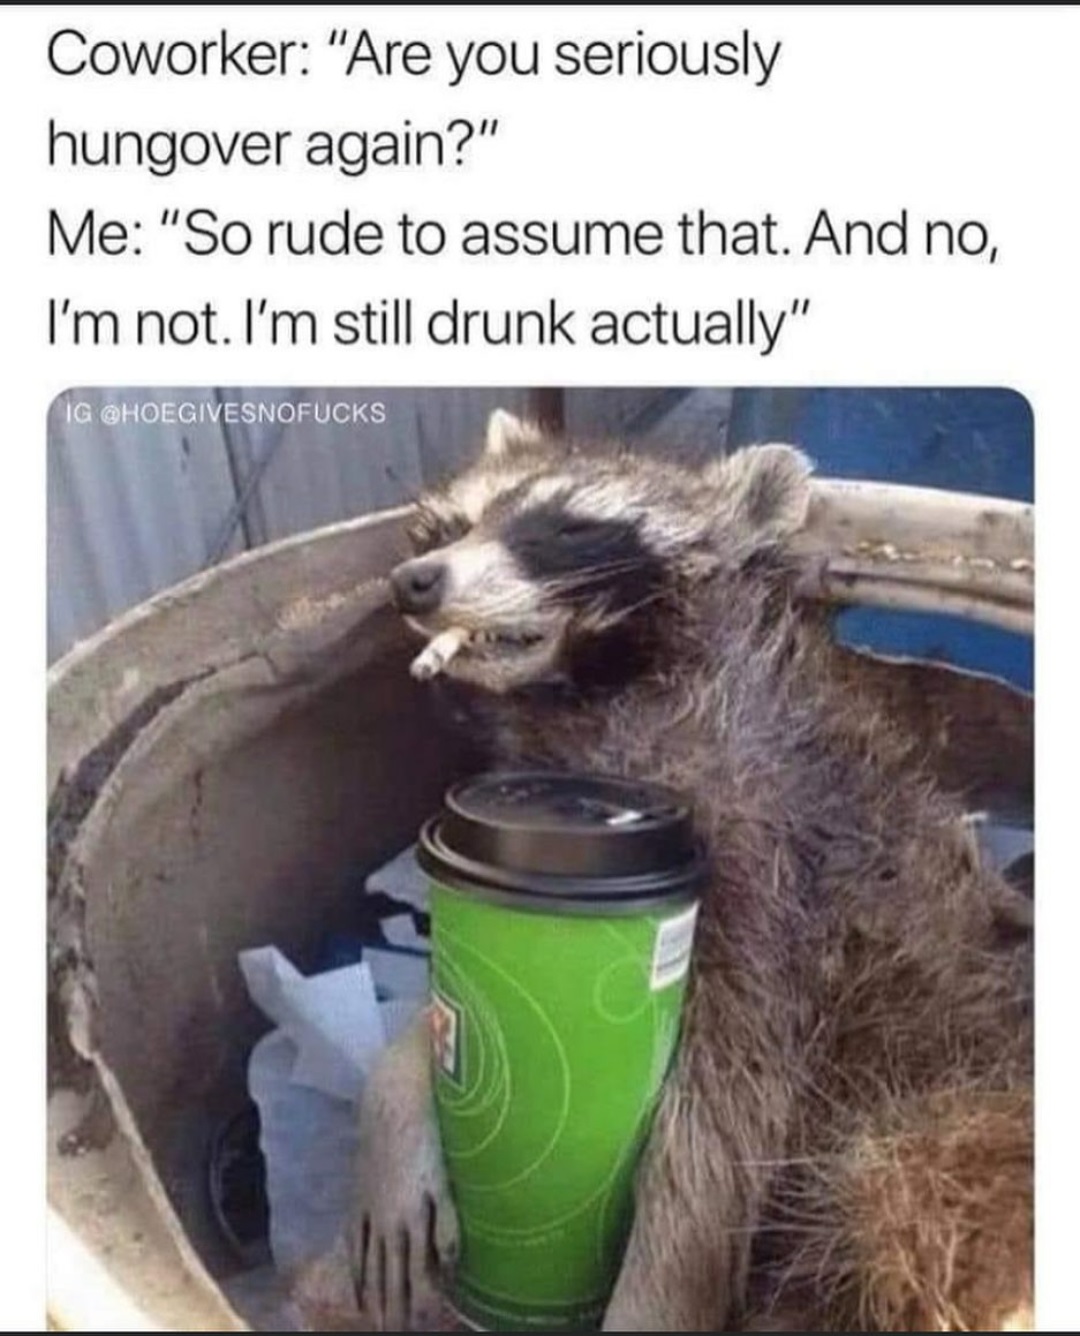 hungover racoon meme - Coworker "Are you seriously hungover again?" Me "So rude to assume that. And no, I'm not. I'm still drunk actually" Ig